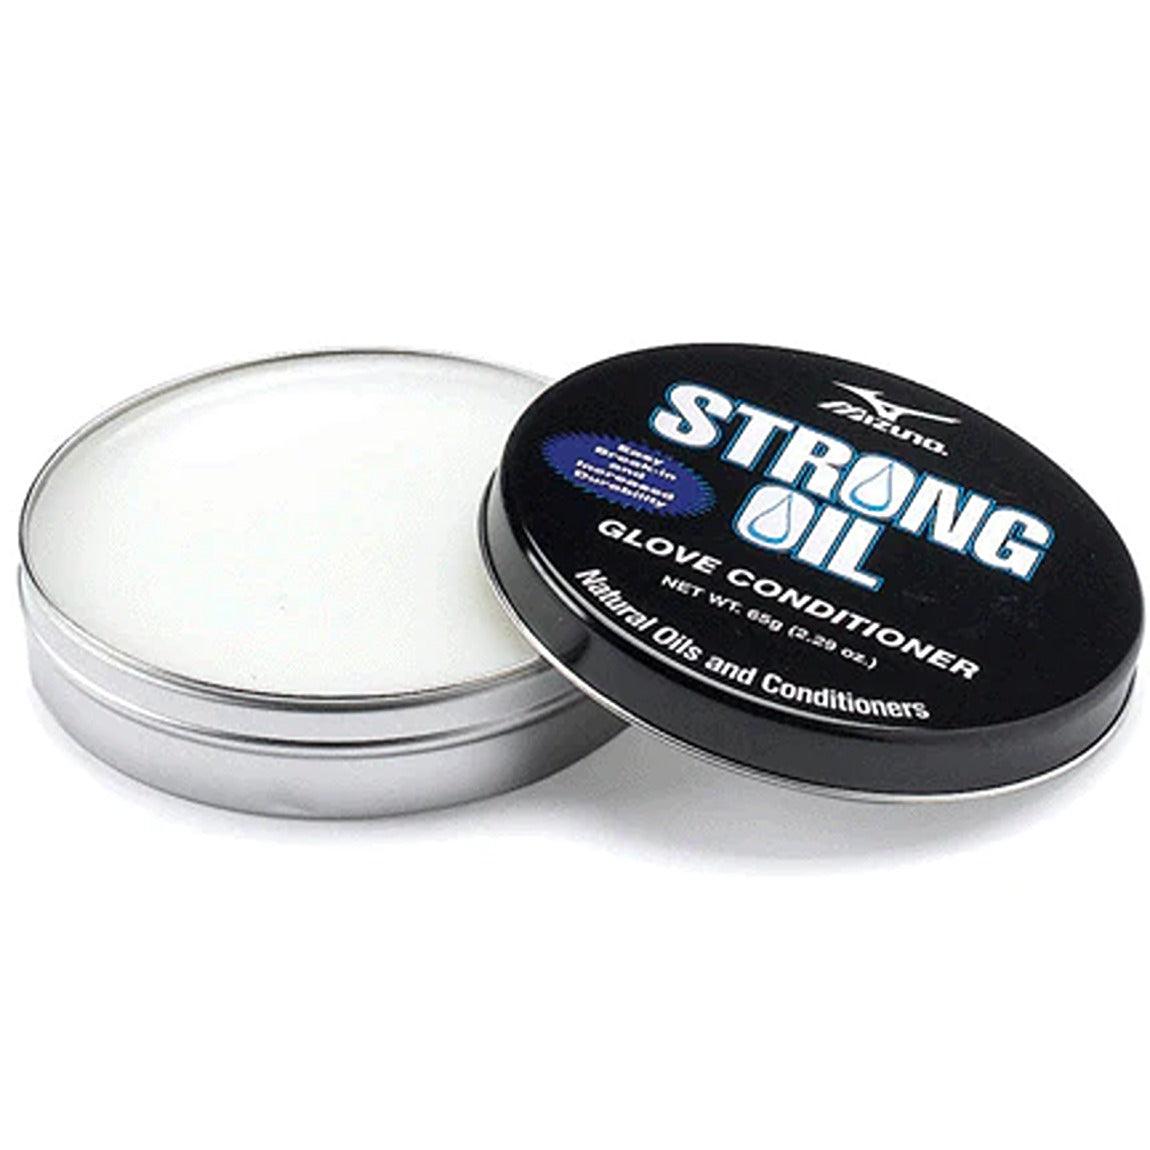 Strong Oil Glove Conditioner - Sports Excellence